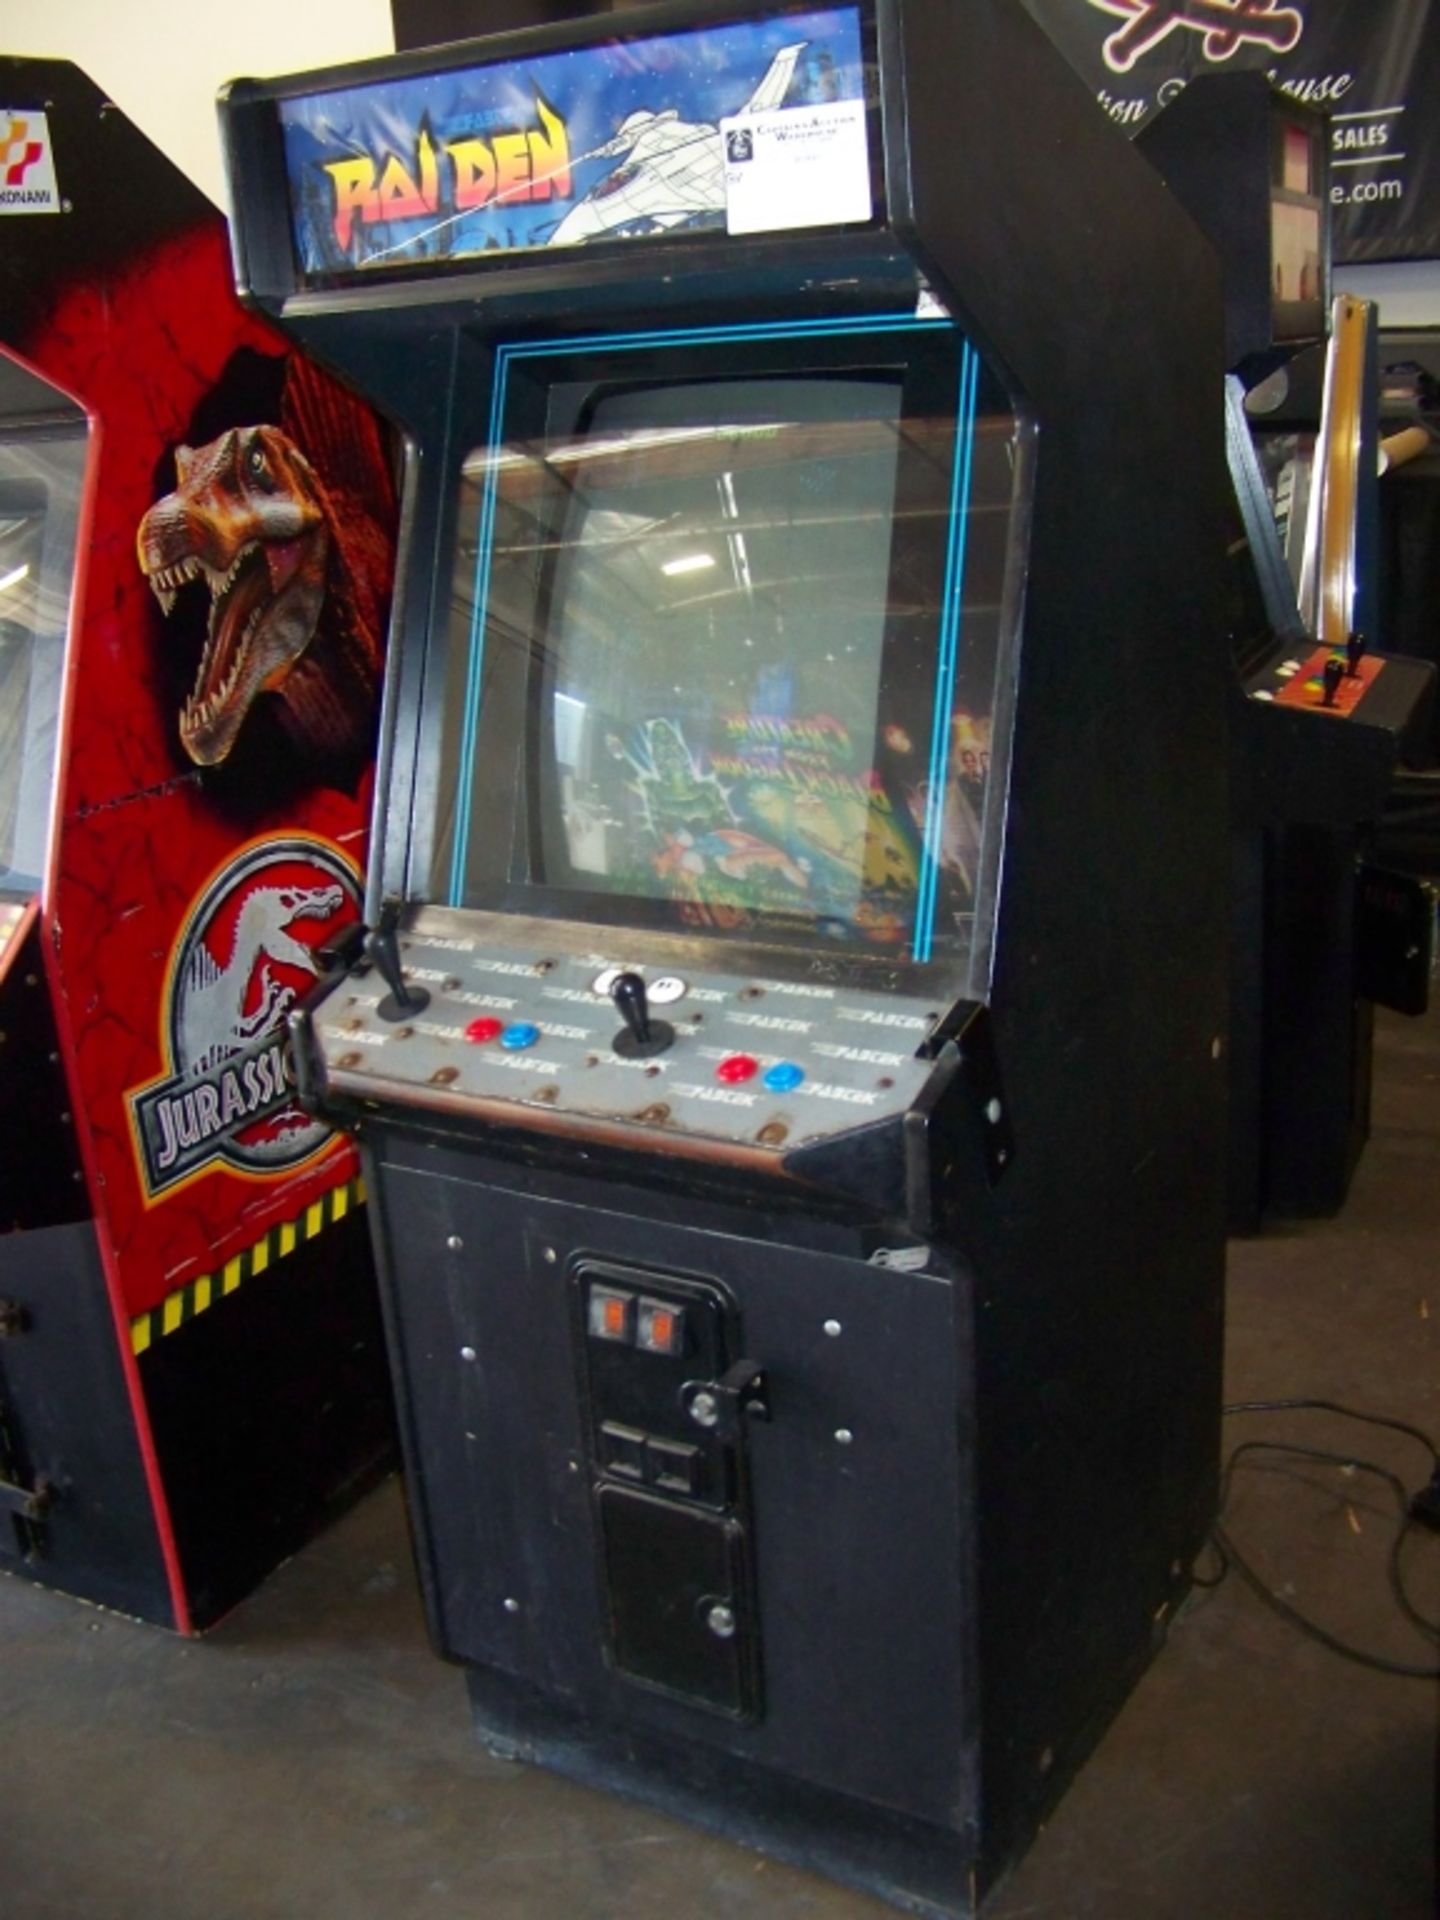 RAIDEN UPRIGHT VERTICAL SHOOTER ARCADE GAME - Image 2 of 4